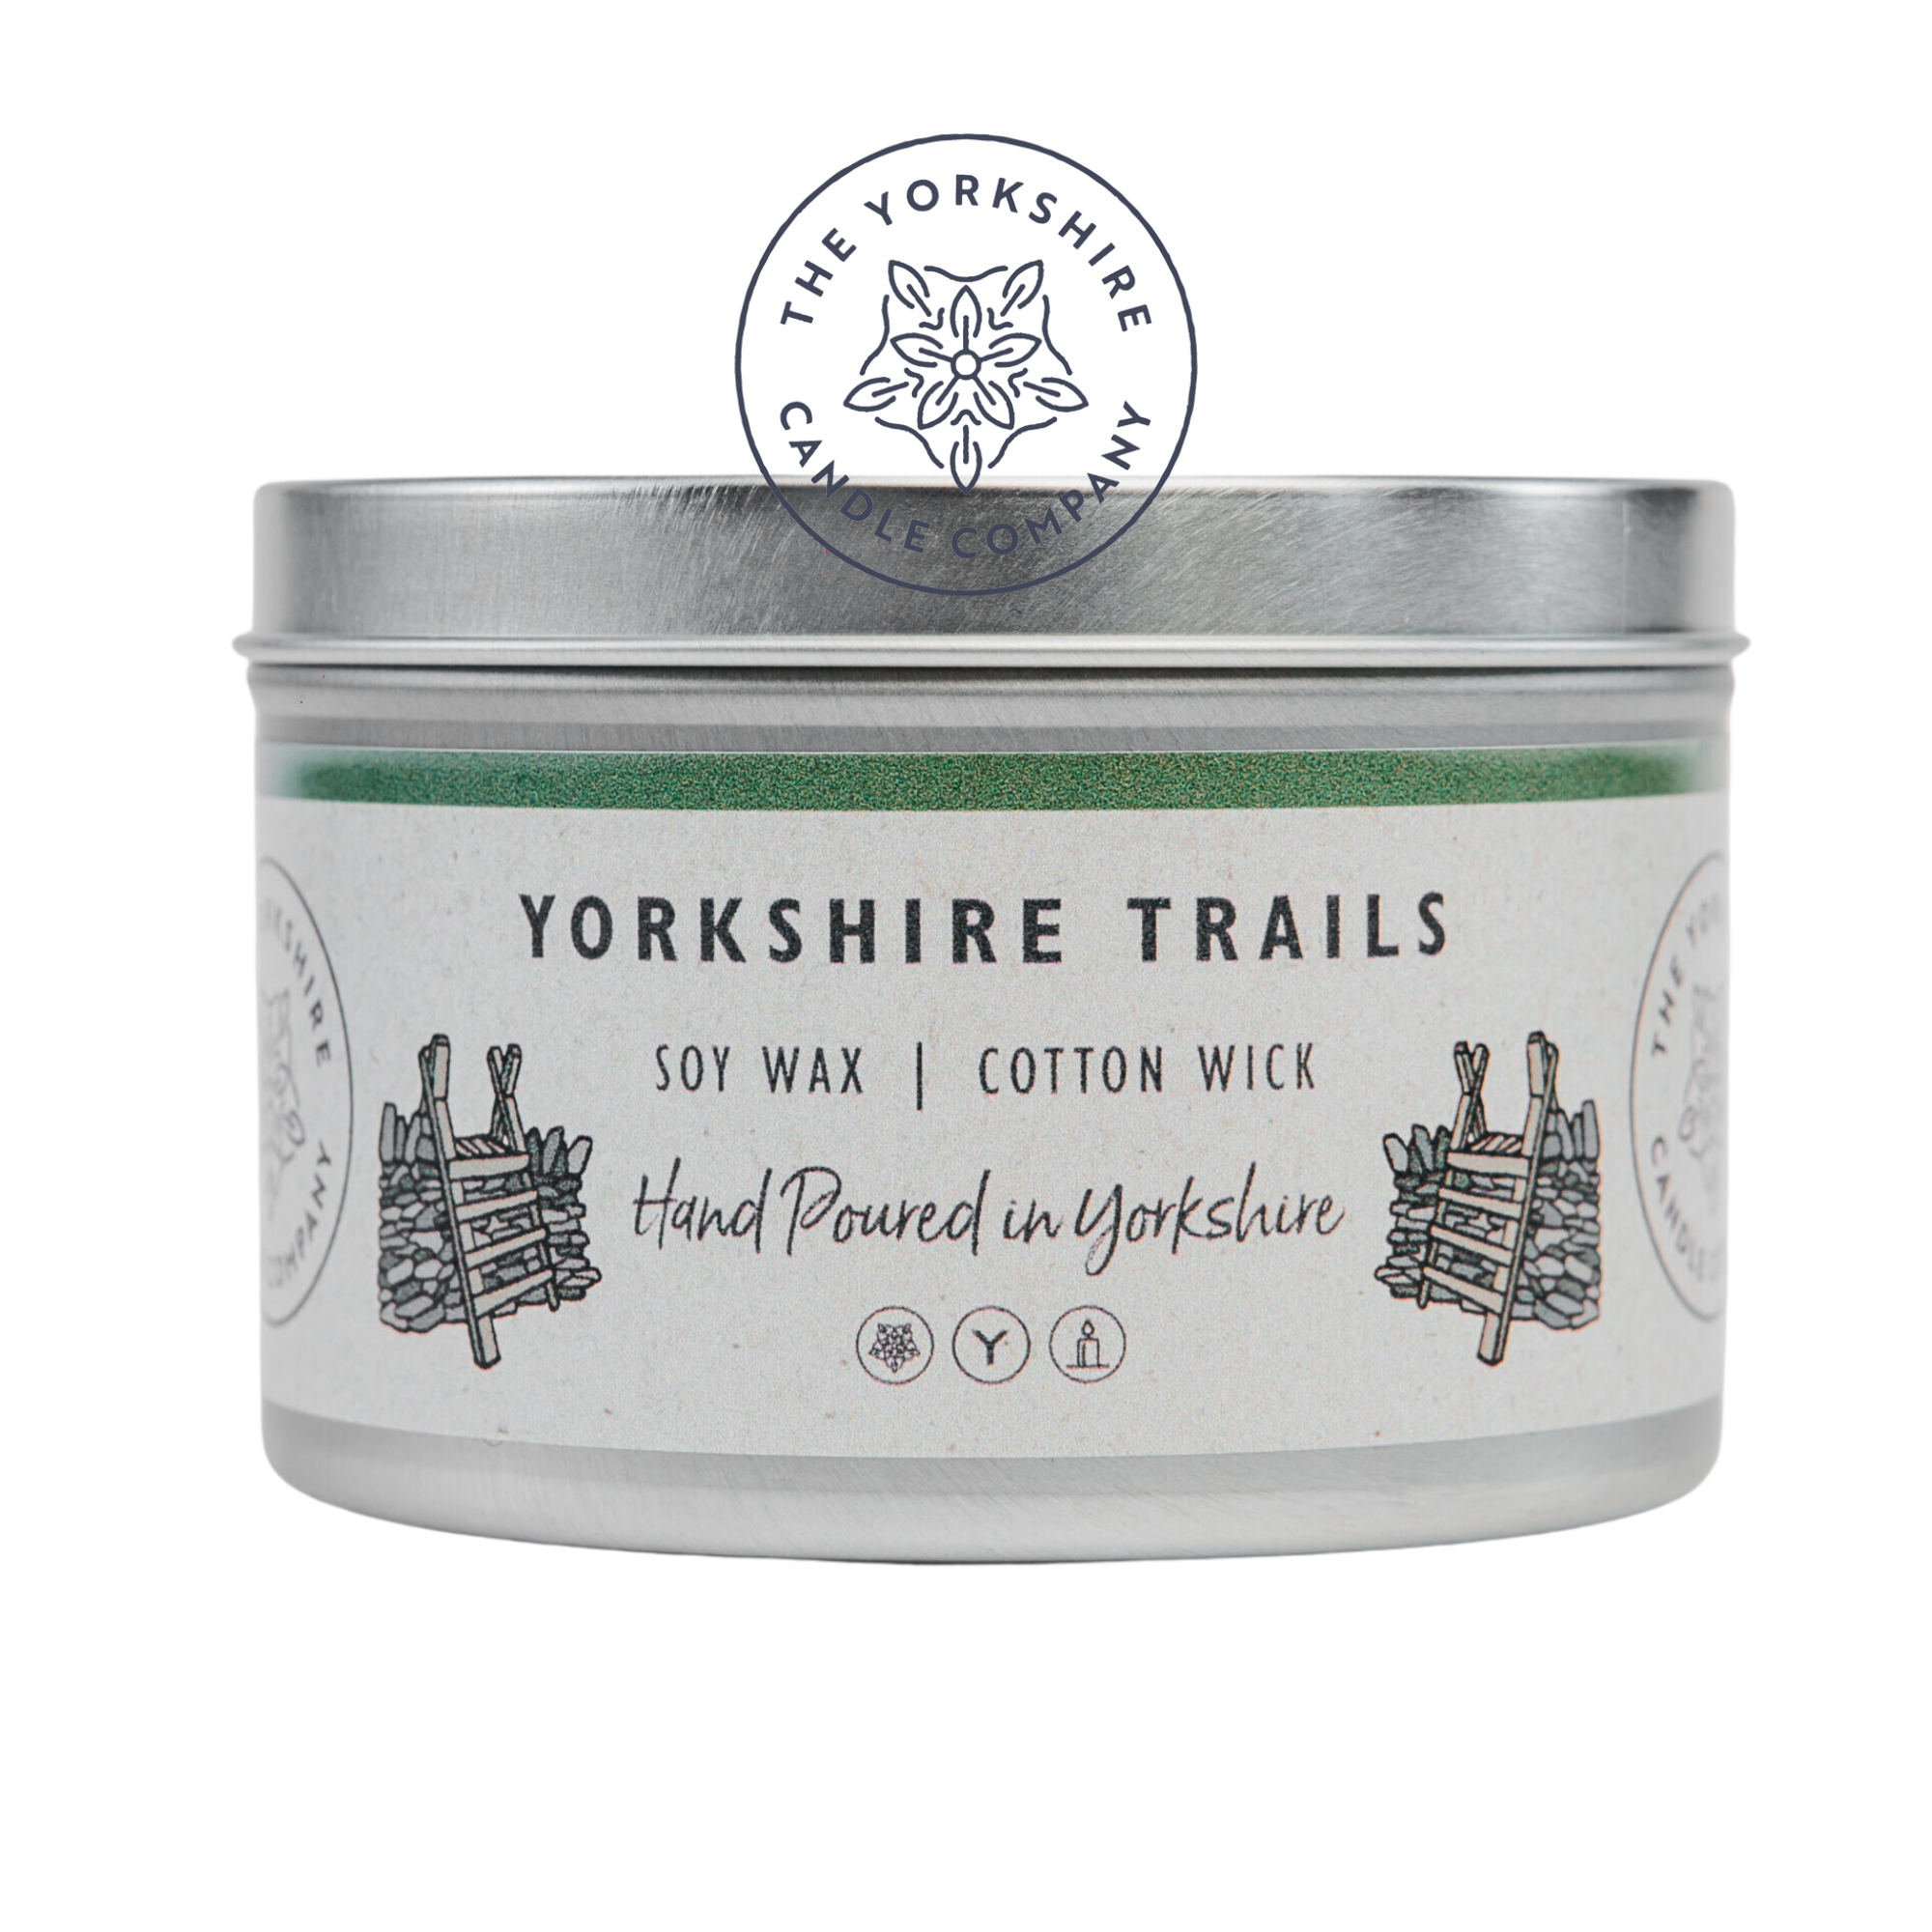 Yorkshire Trails - Soy Wax Cotton Wick Hand Poured Candle by The Yorkshire Candle Company